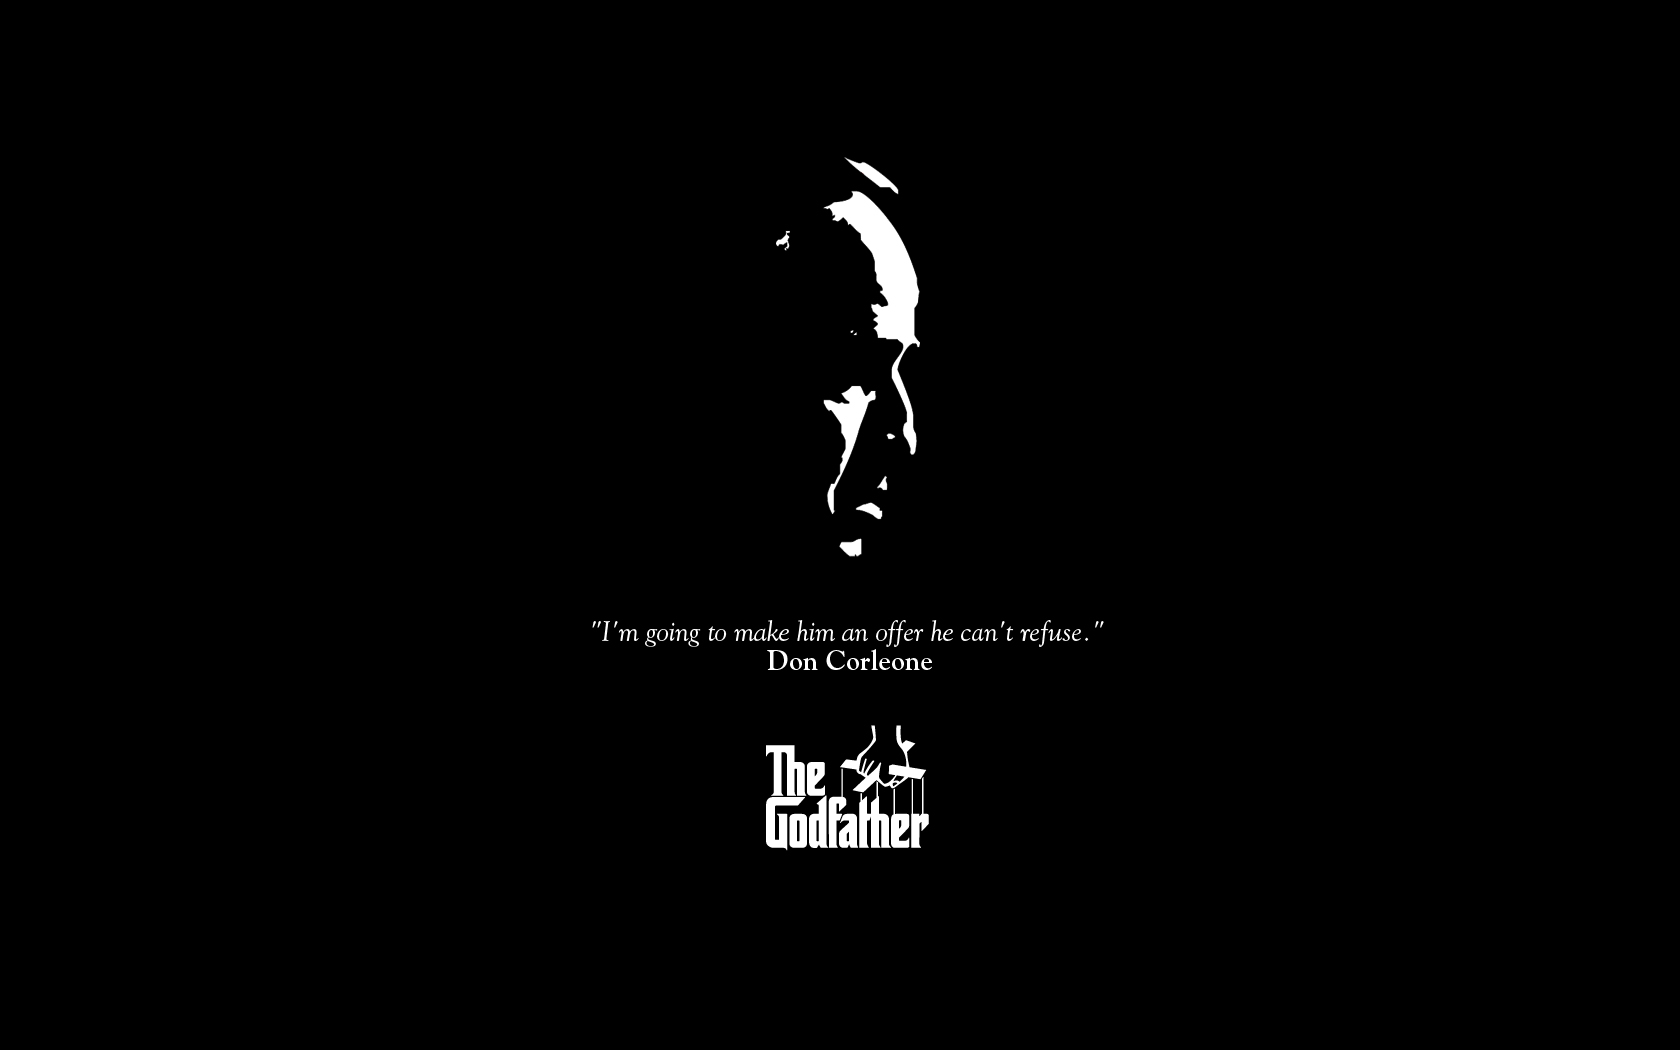 The Godfather Quotes Wallpaper. QuotesGram